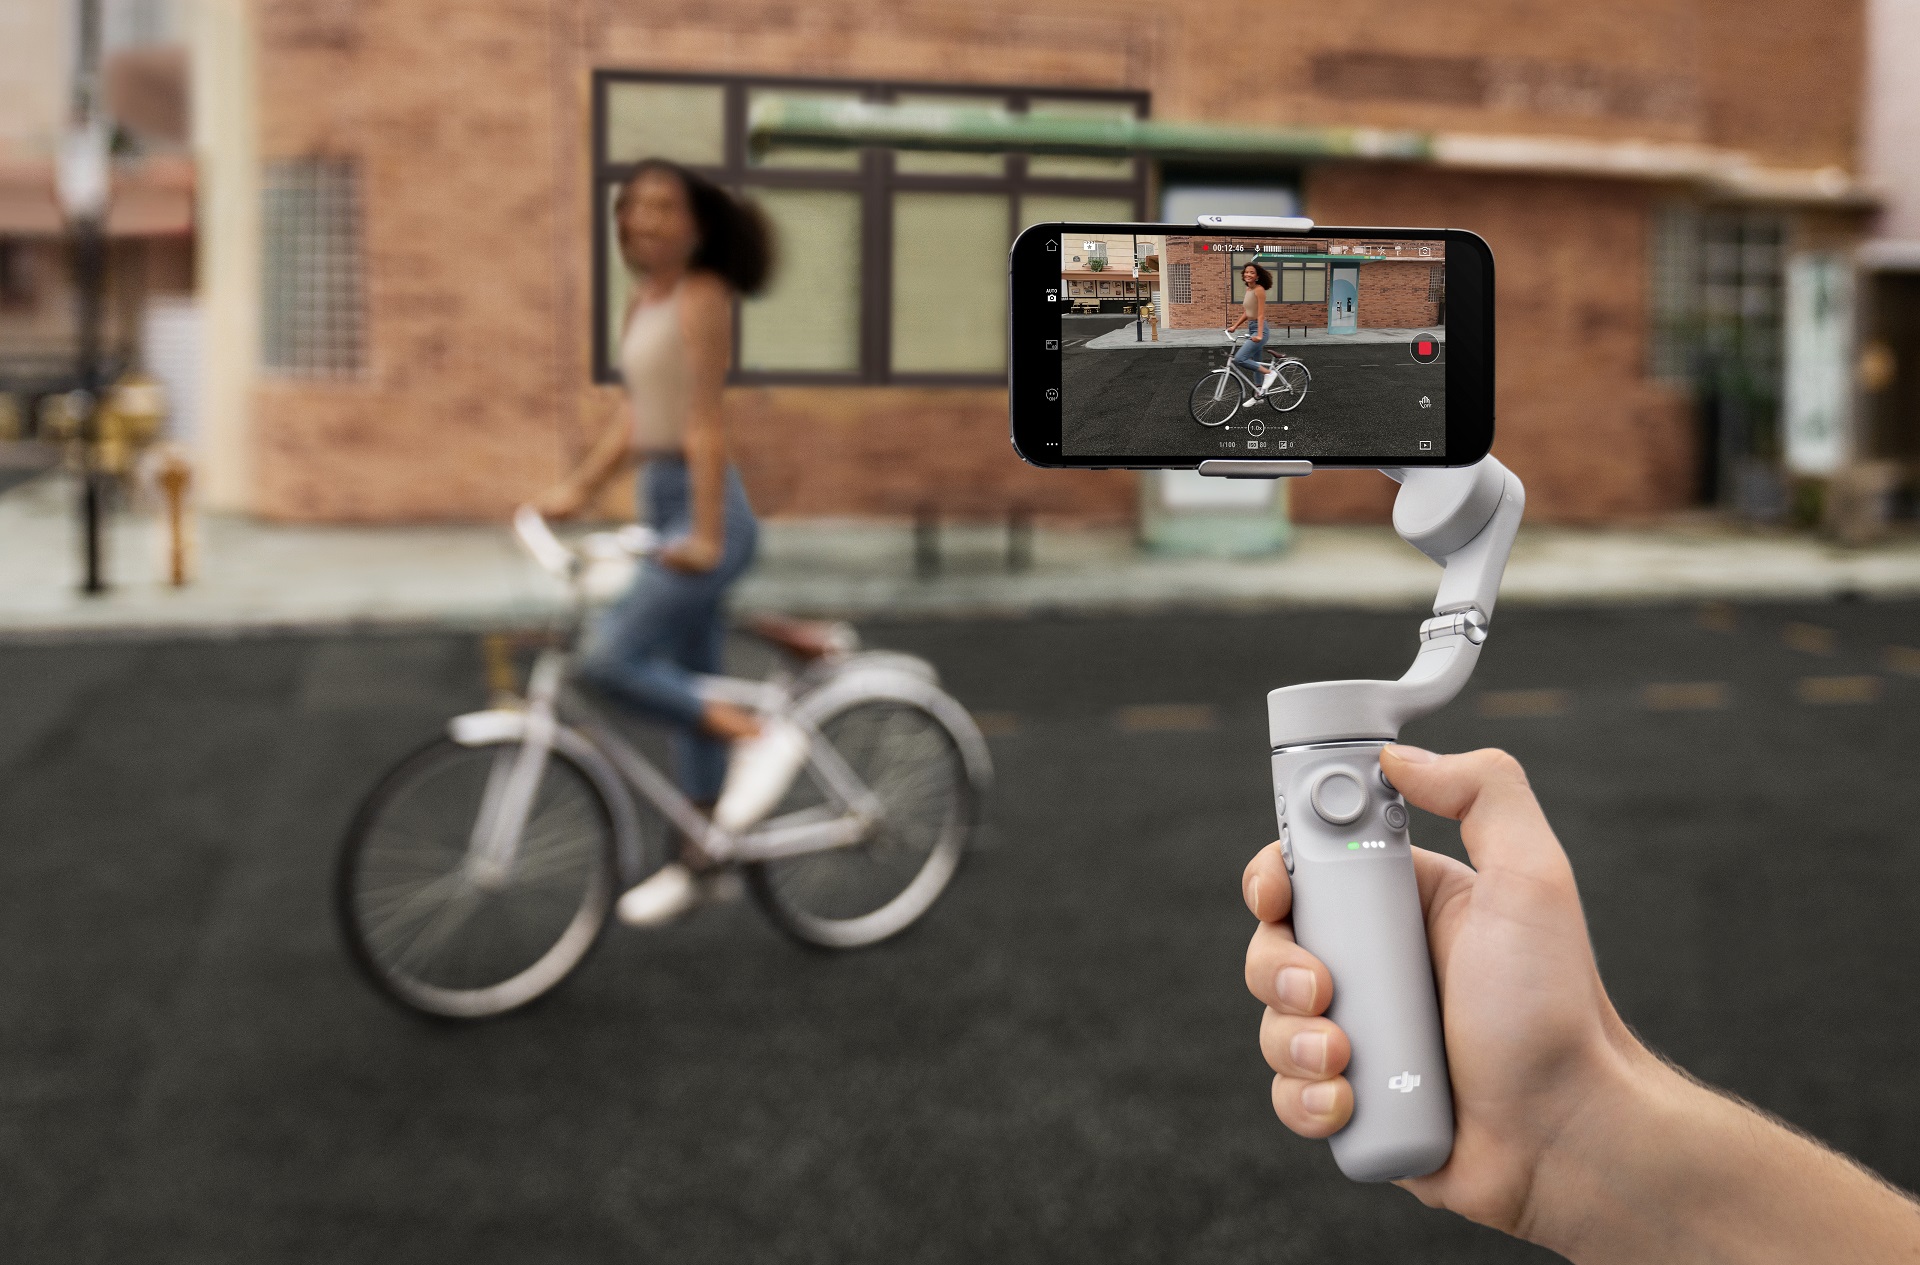 DJI OM 5 Smartphone Gimbal Announced - Smaller and Lighter with